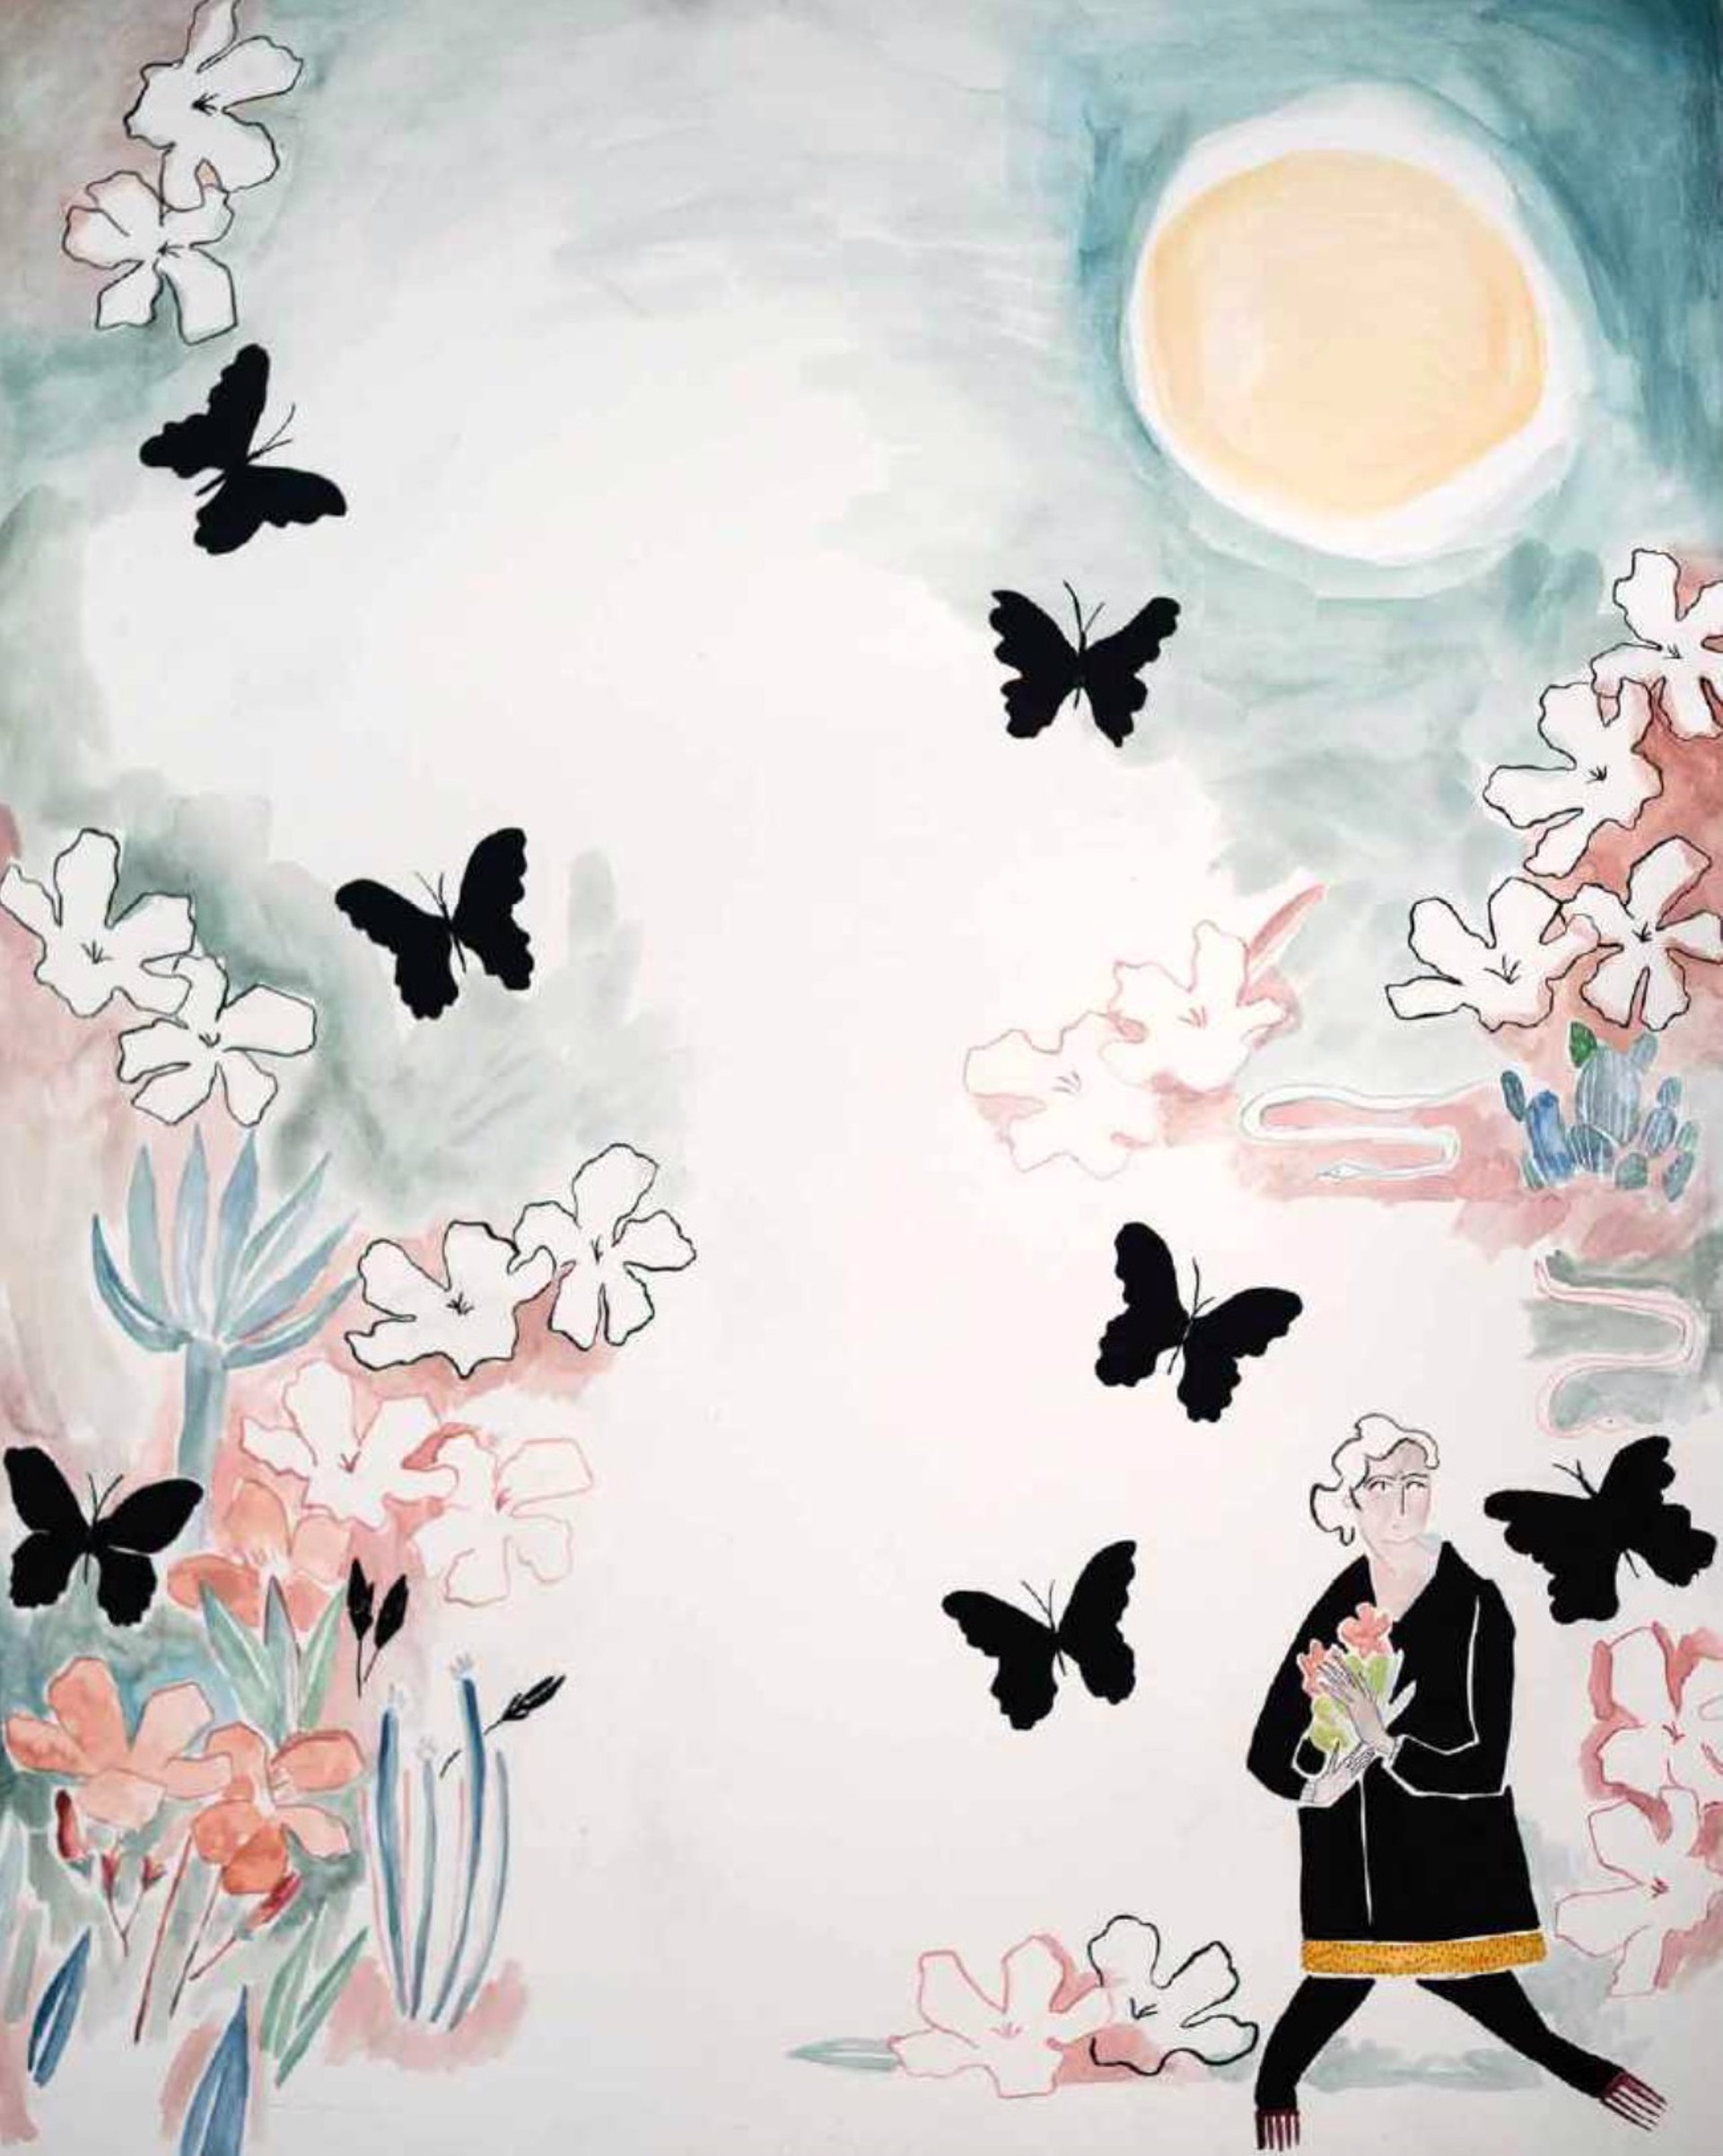 Among the Black Butterflies by Zahra Marwan